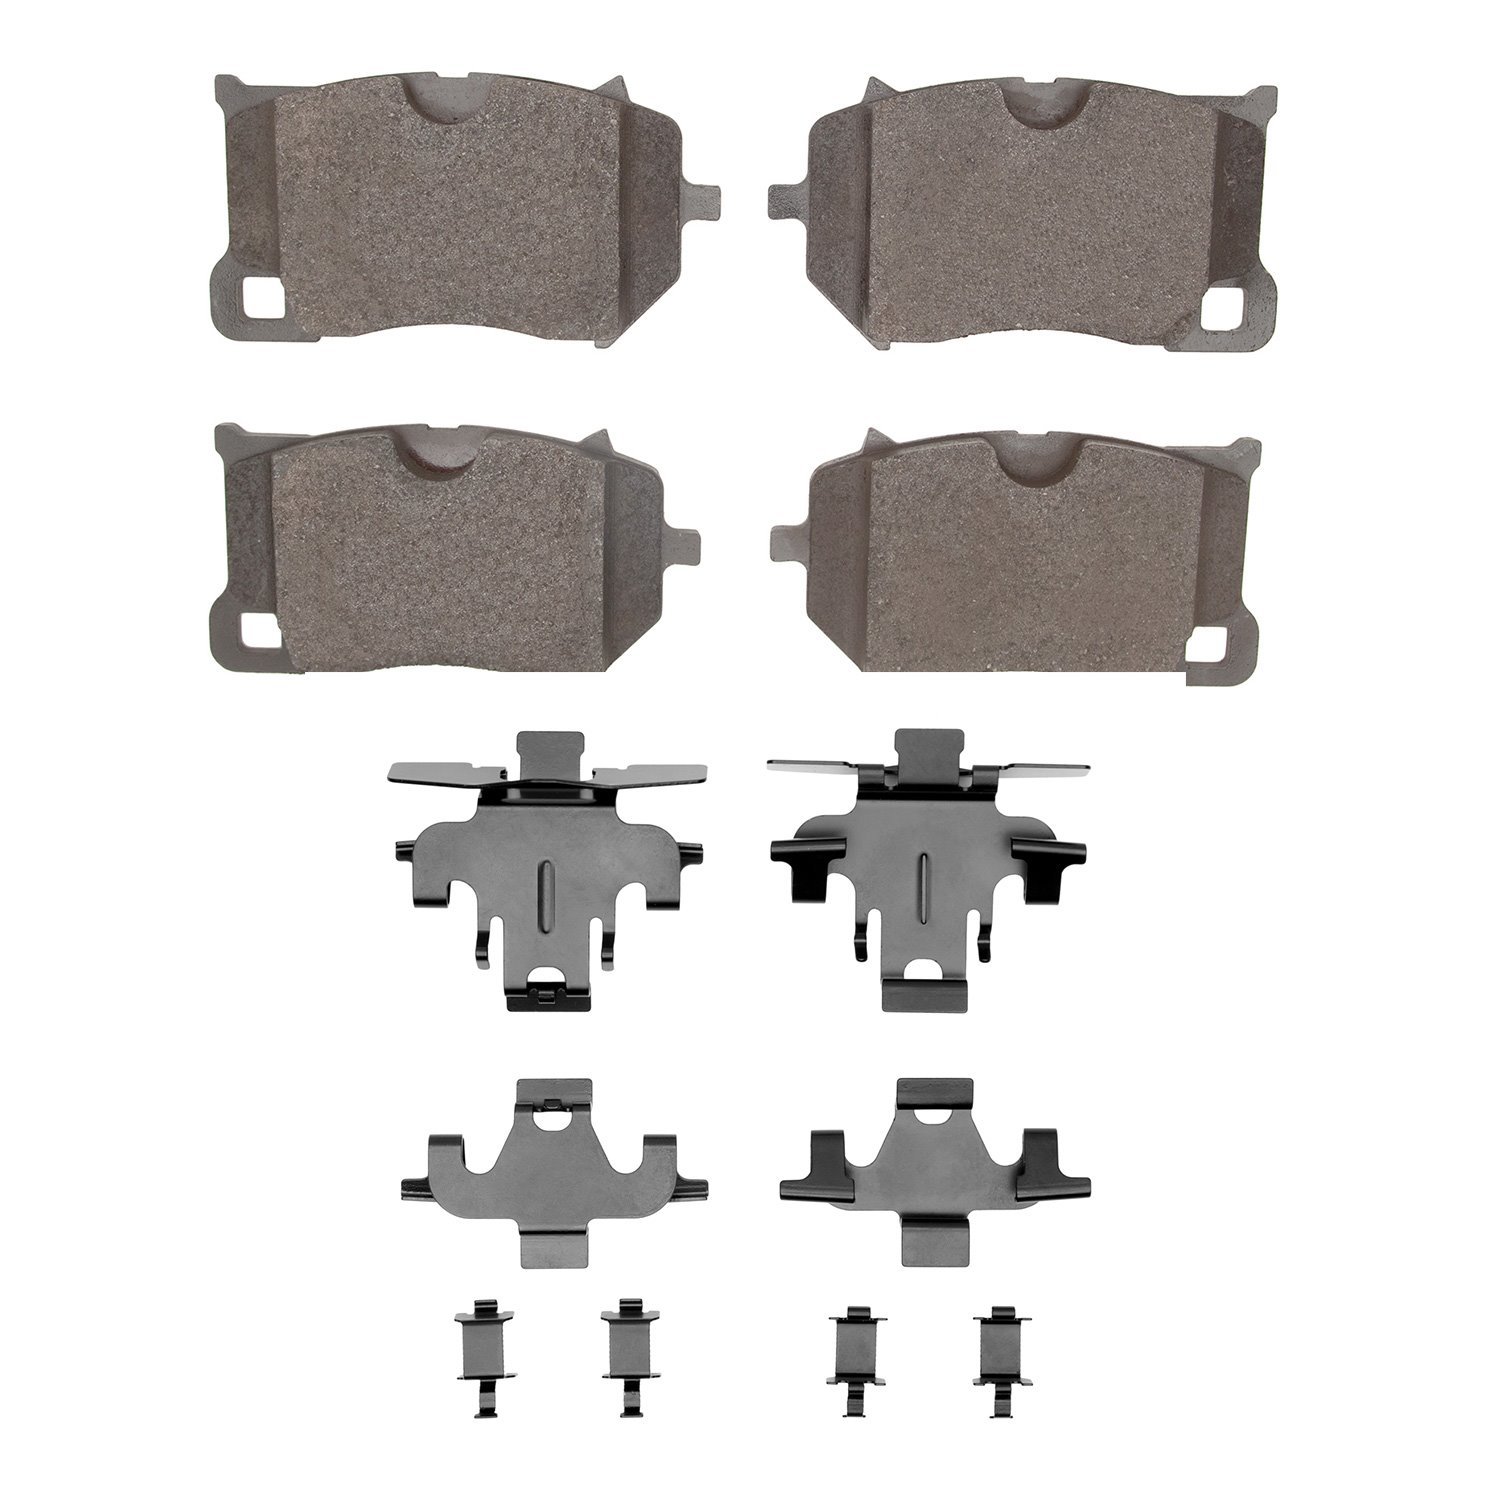 1551-2284-01 5000 Advanced Low-Metallic Brake Pads & Hardware Kit, Fits Select Multiple Makes/Models, Position: Front